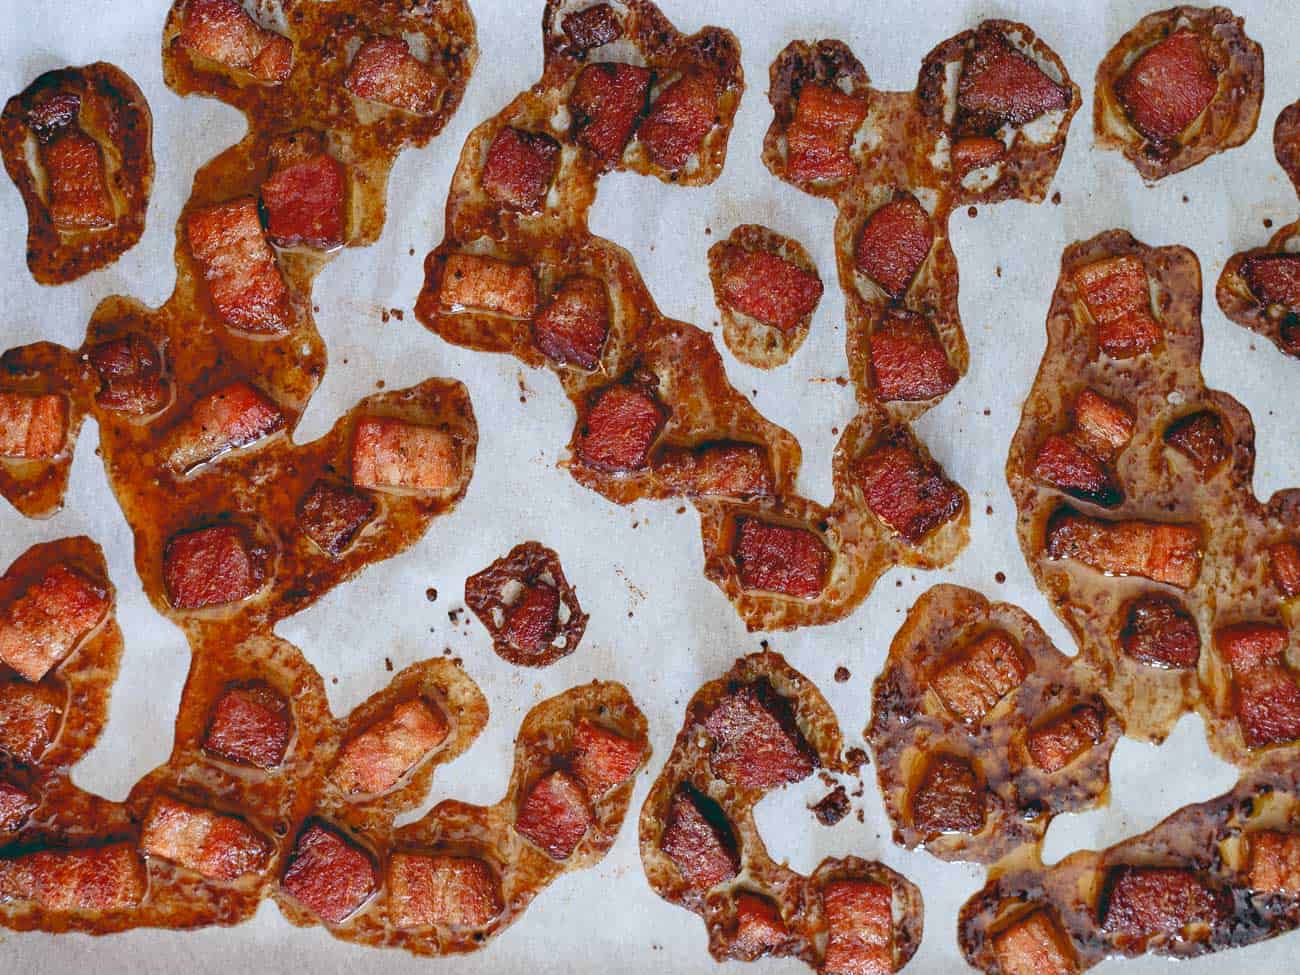 Candied bacon gets paired with maple candied pecans and walnuts for a delicious holiday brittle!